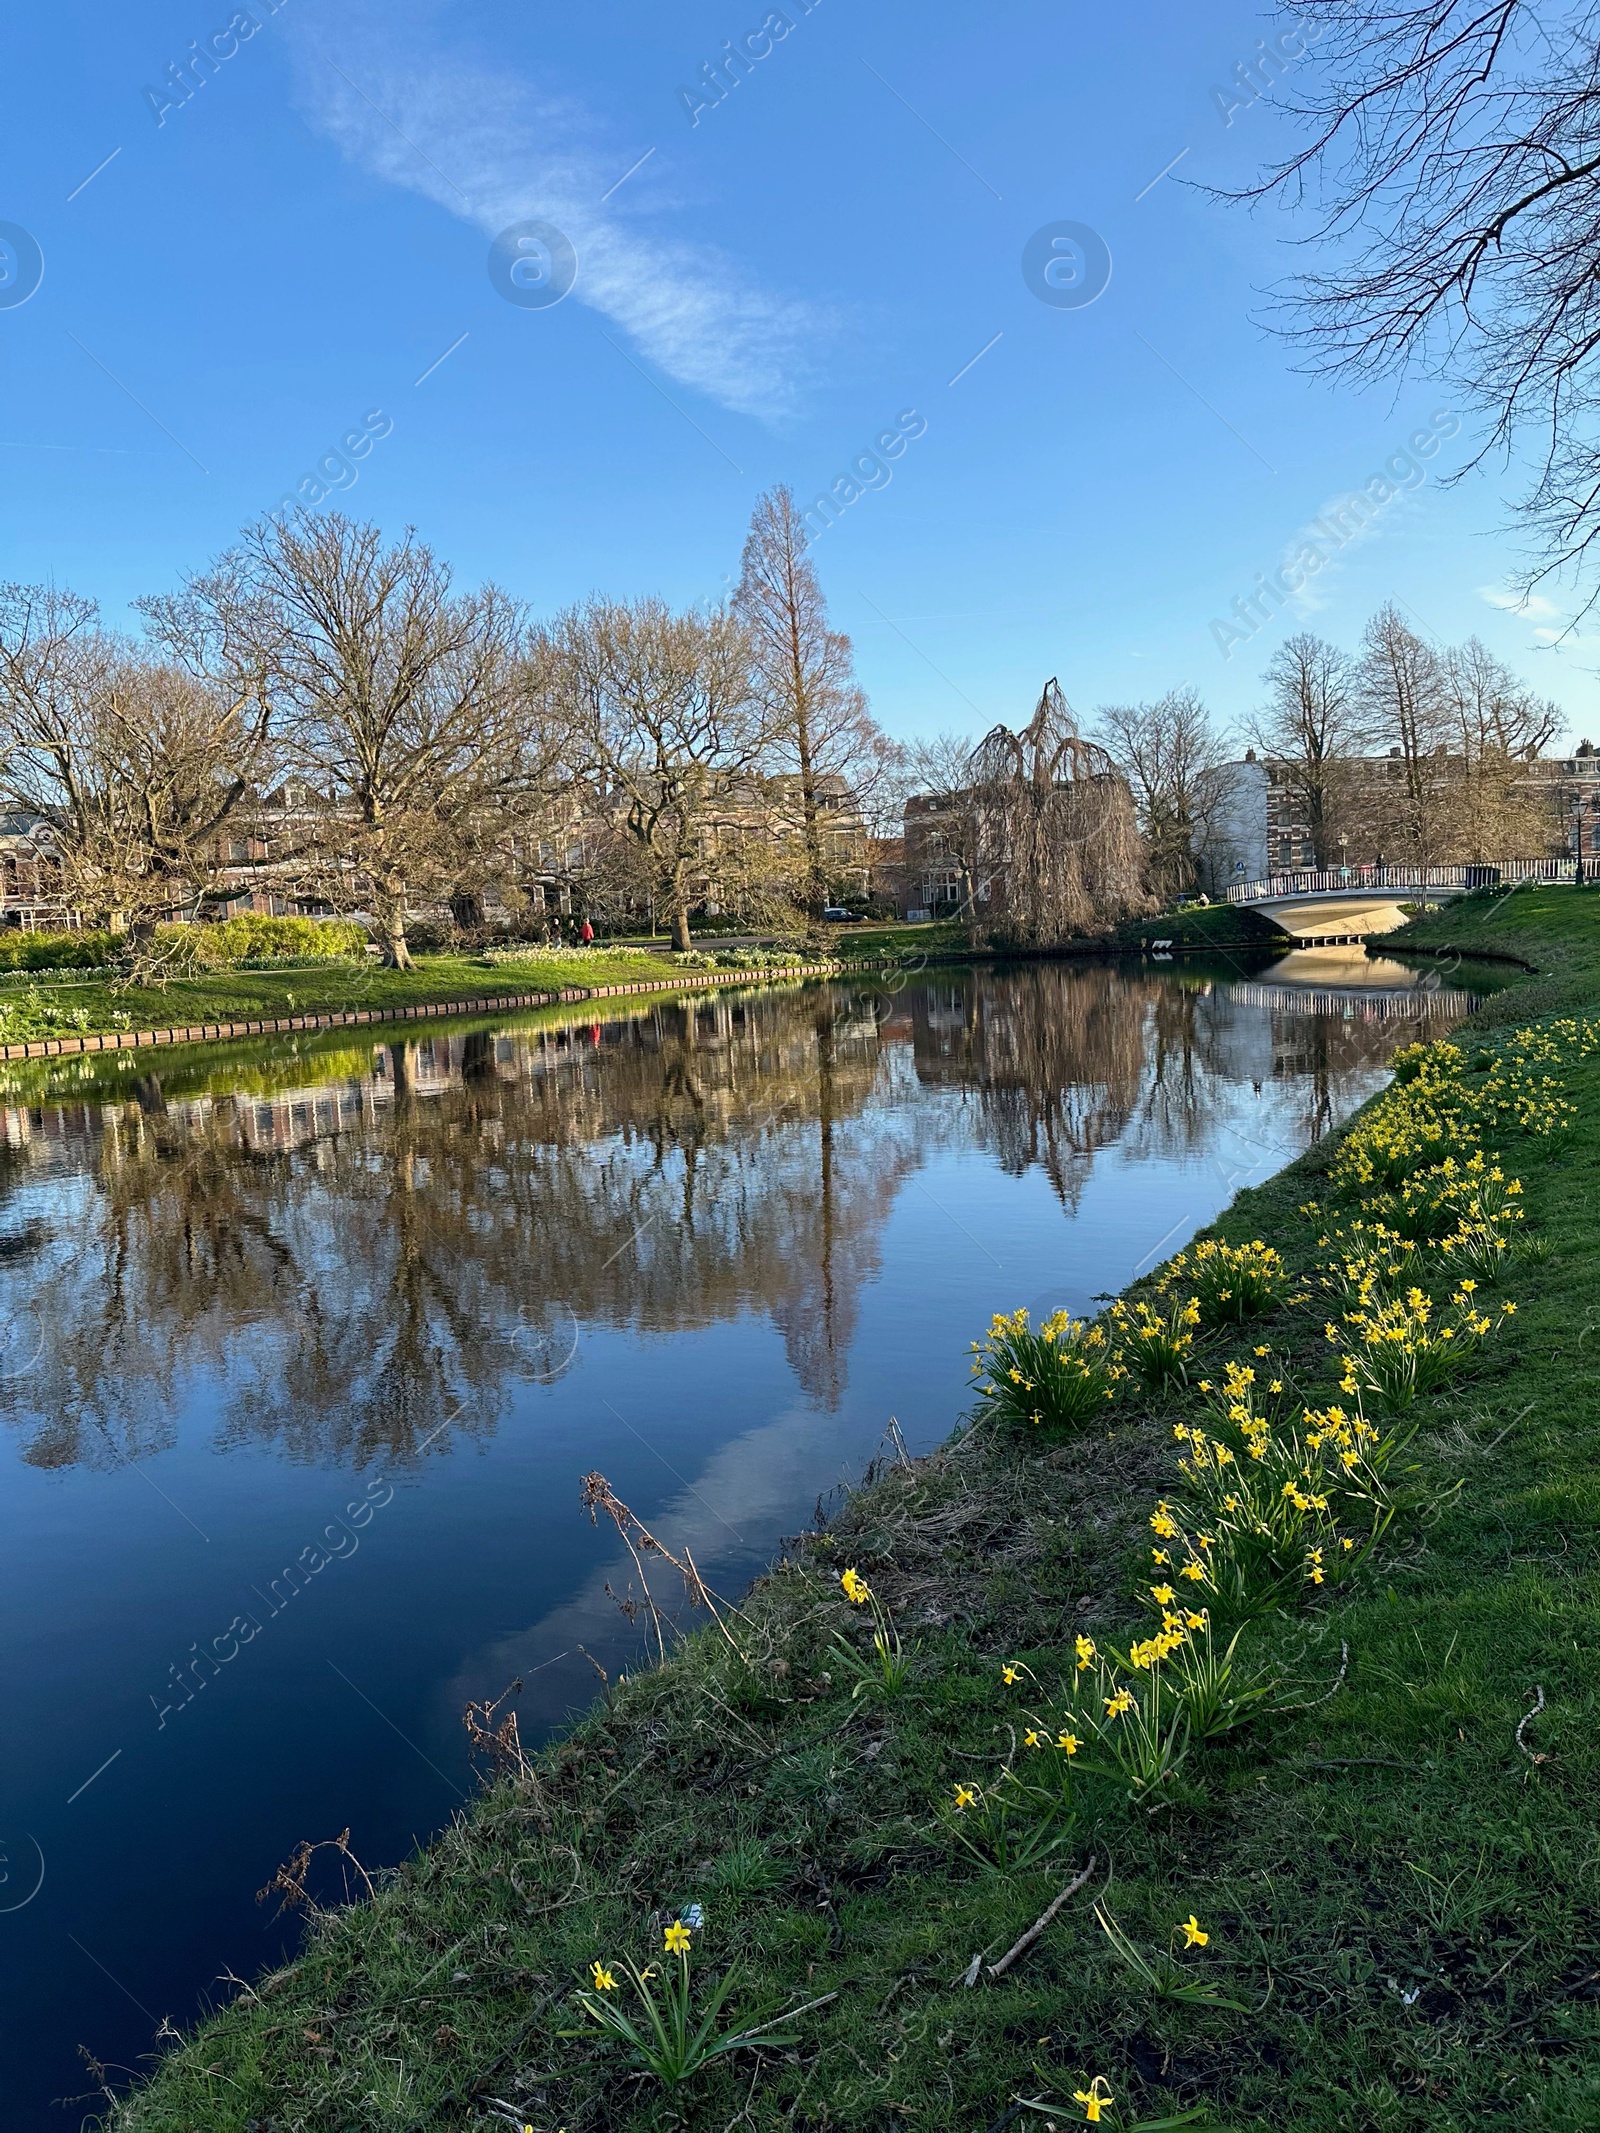 Photo of Scenic view of canal, trees and narcissus flowers under blue sky